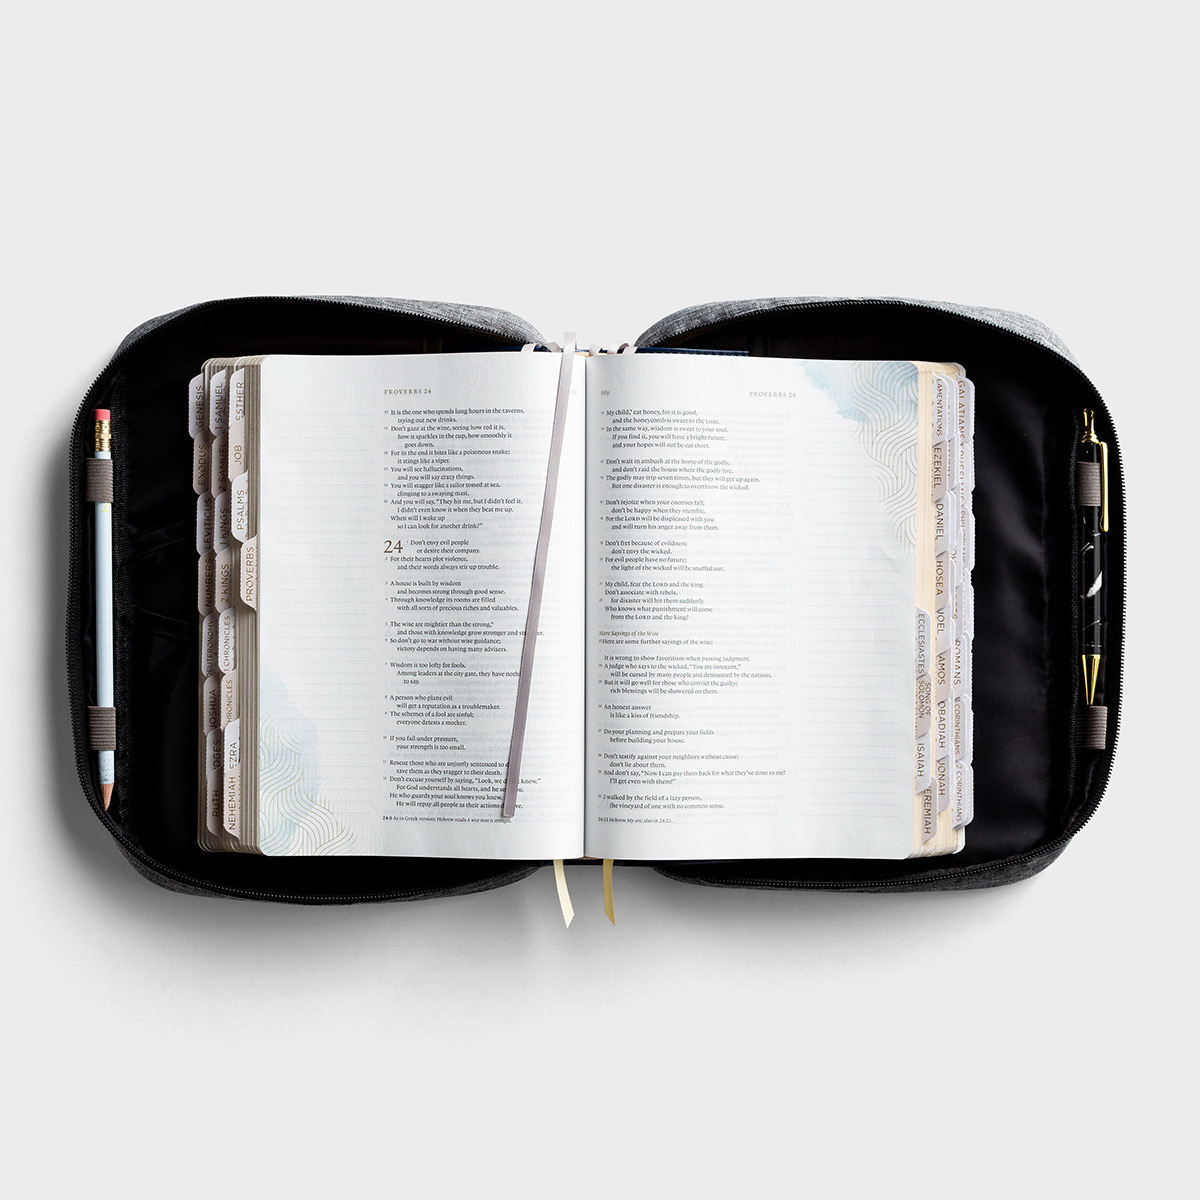 Gold Cross - Gray Canvas Bible Cover